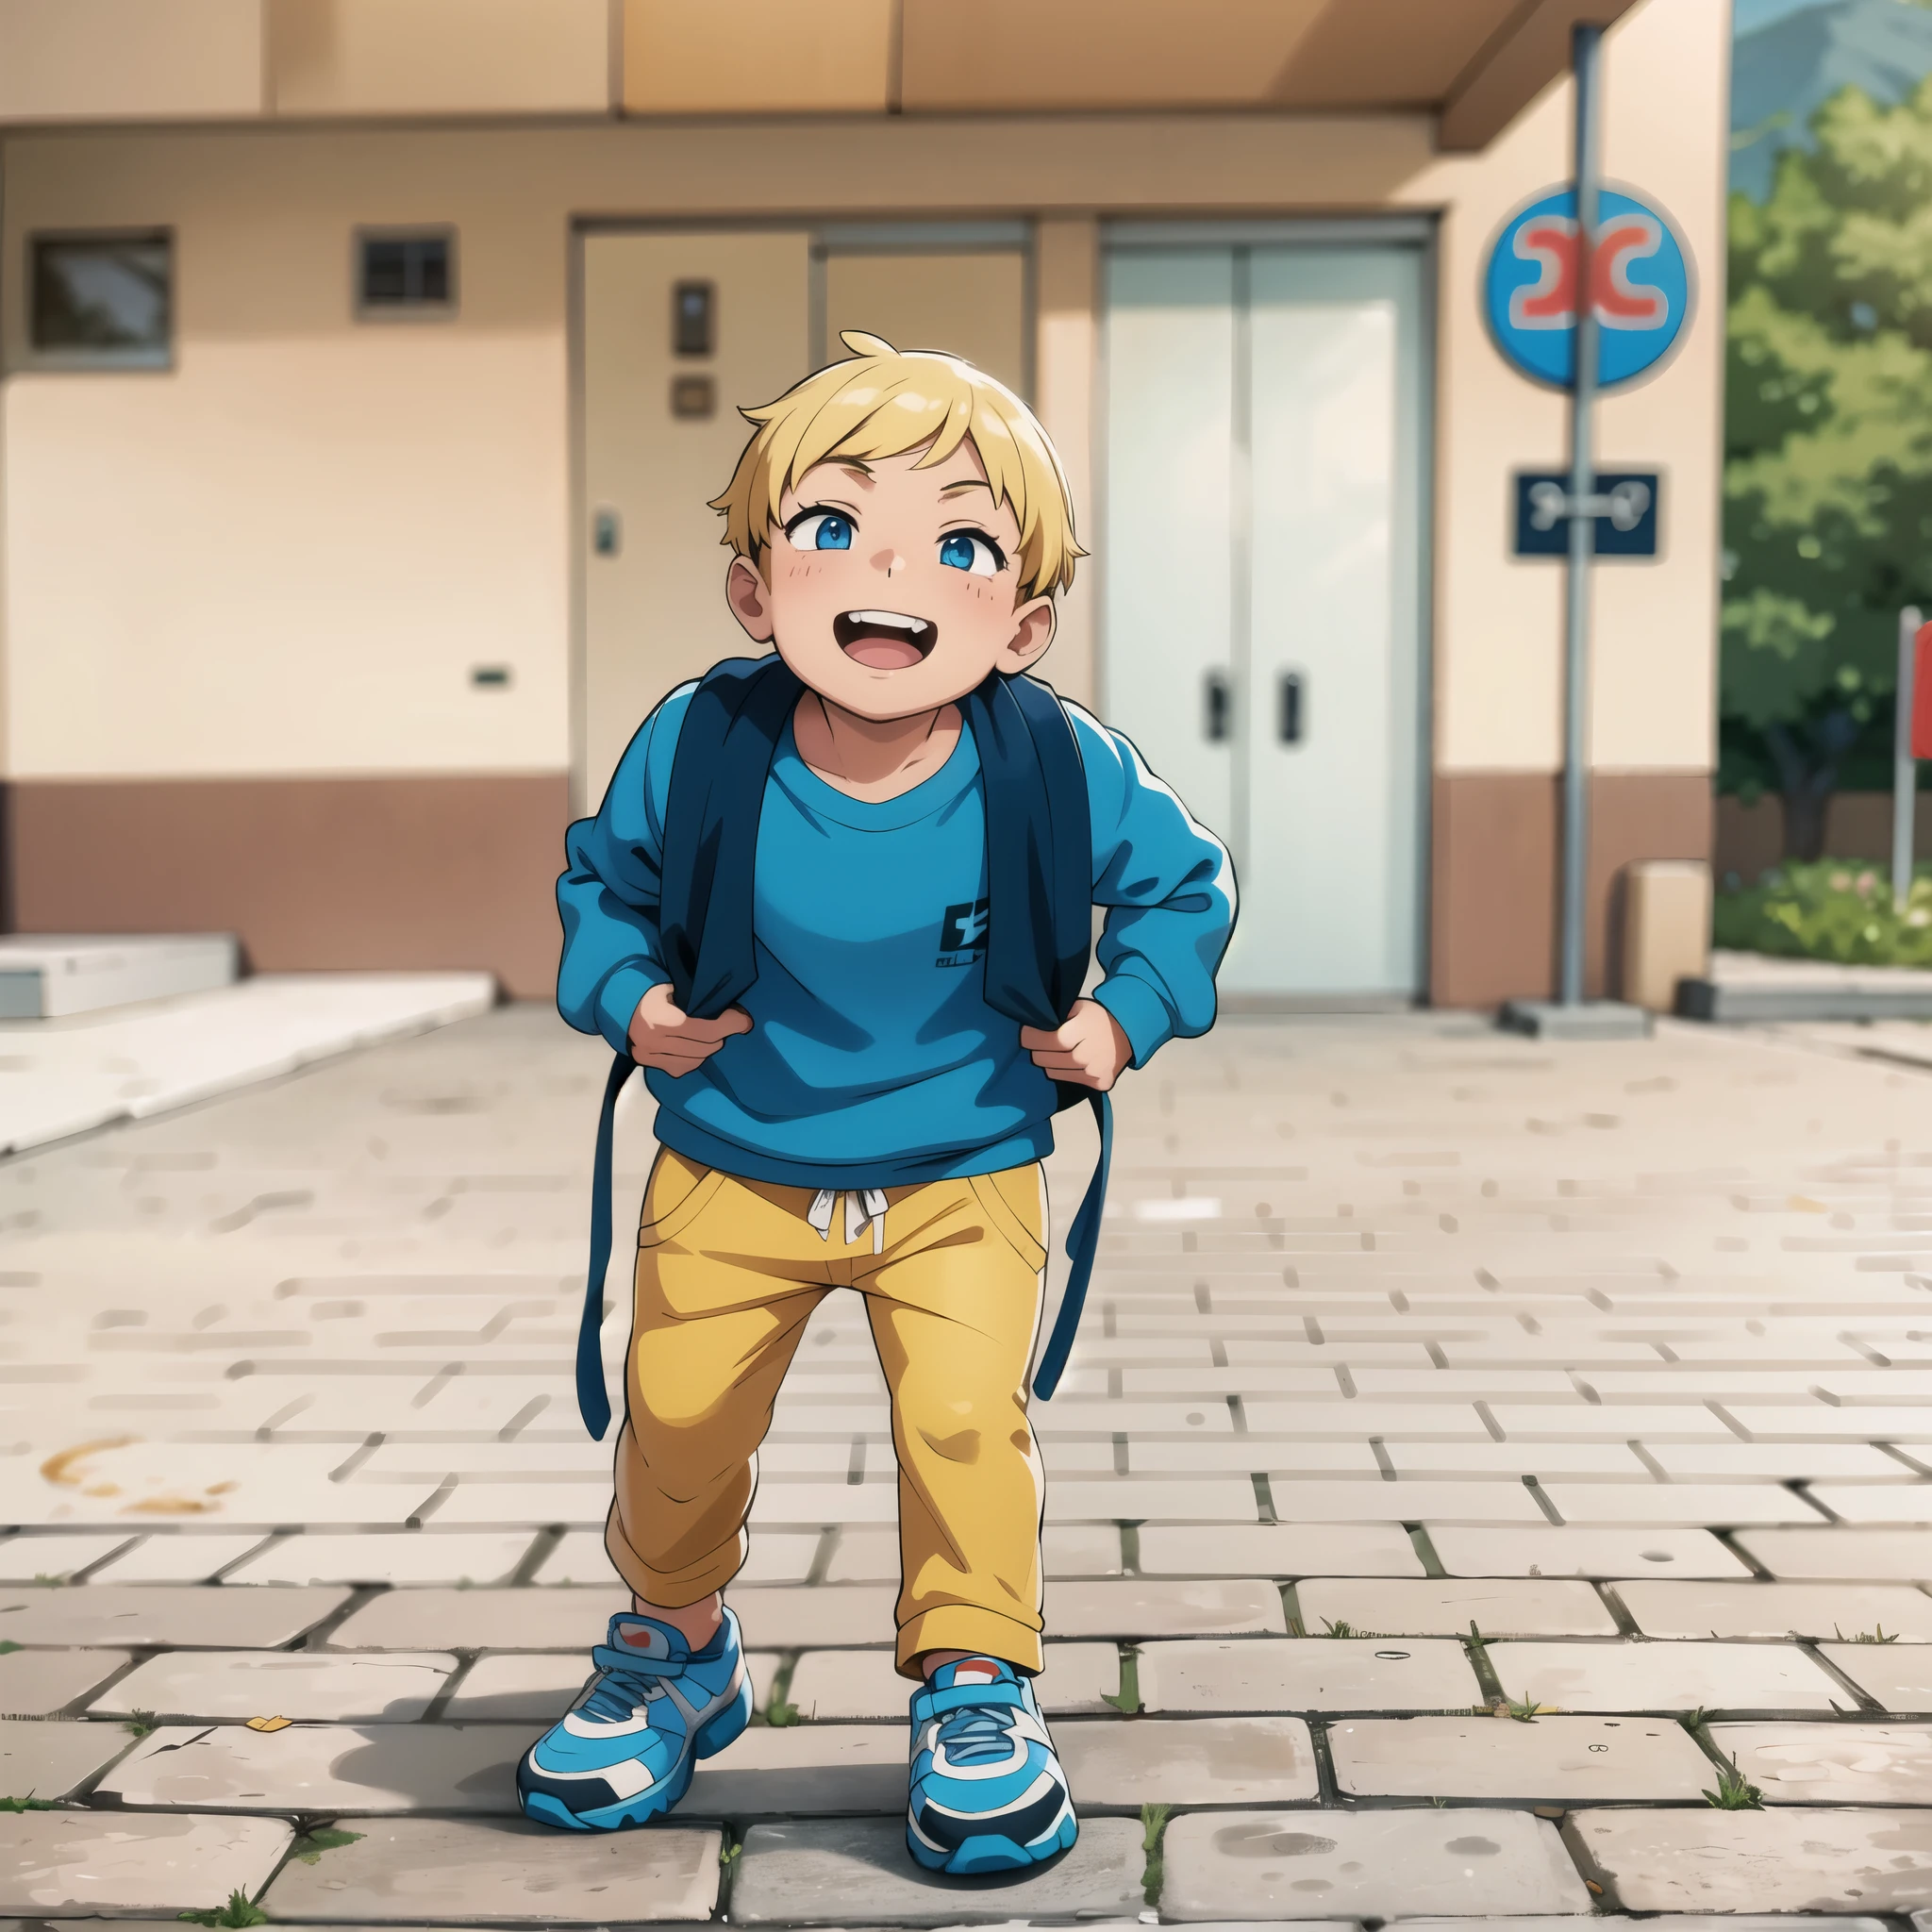 ((masterpiece, best quality)), absurd, pokemon theme, in the middle of a beautiful landscape, standing on a dusty sandy road, happy, cute boy, gorgeous boy, white teeth, blue eyes, blond hair, walking boy, wearing a blue sweatshirt and yellow sweatpants, wearing blue shoes with a red stripe and laces, boy walks towards camera and looks into camera, pikachu stands next to boy, pikachu laughs at boy, pikachu looks at boy, river bends in background, mountains are visible , the smaller planet Neptune can be seen in the sky